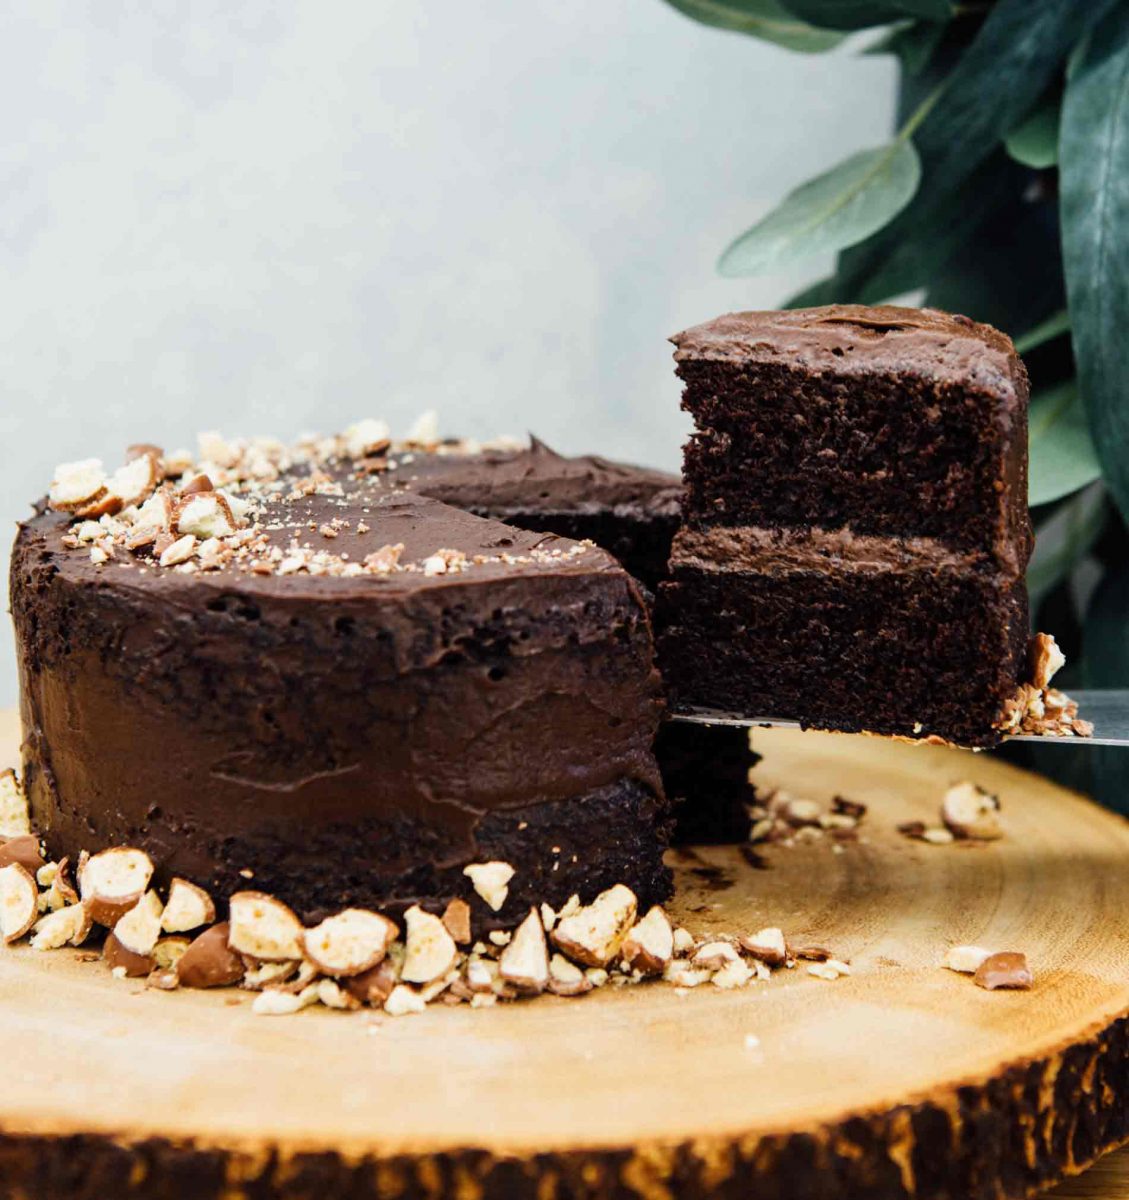 This mini chocolate malt cake for two is perfect for any celebration or if you're just craving a chocolate cake and don't want to make a large one!